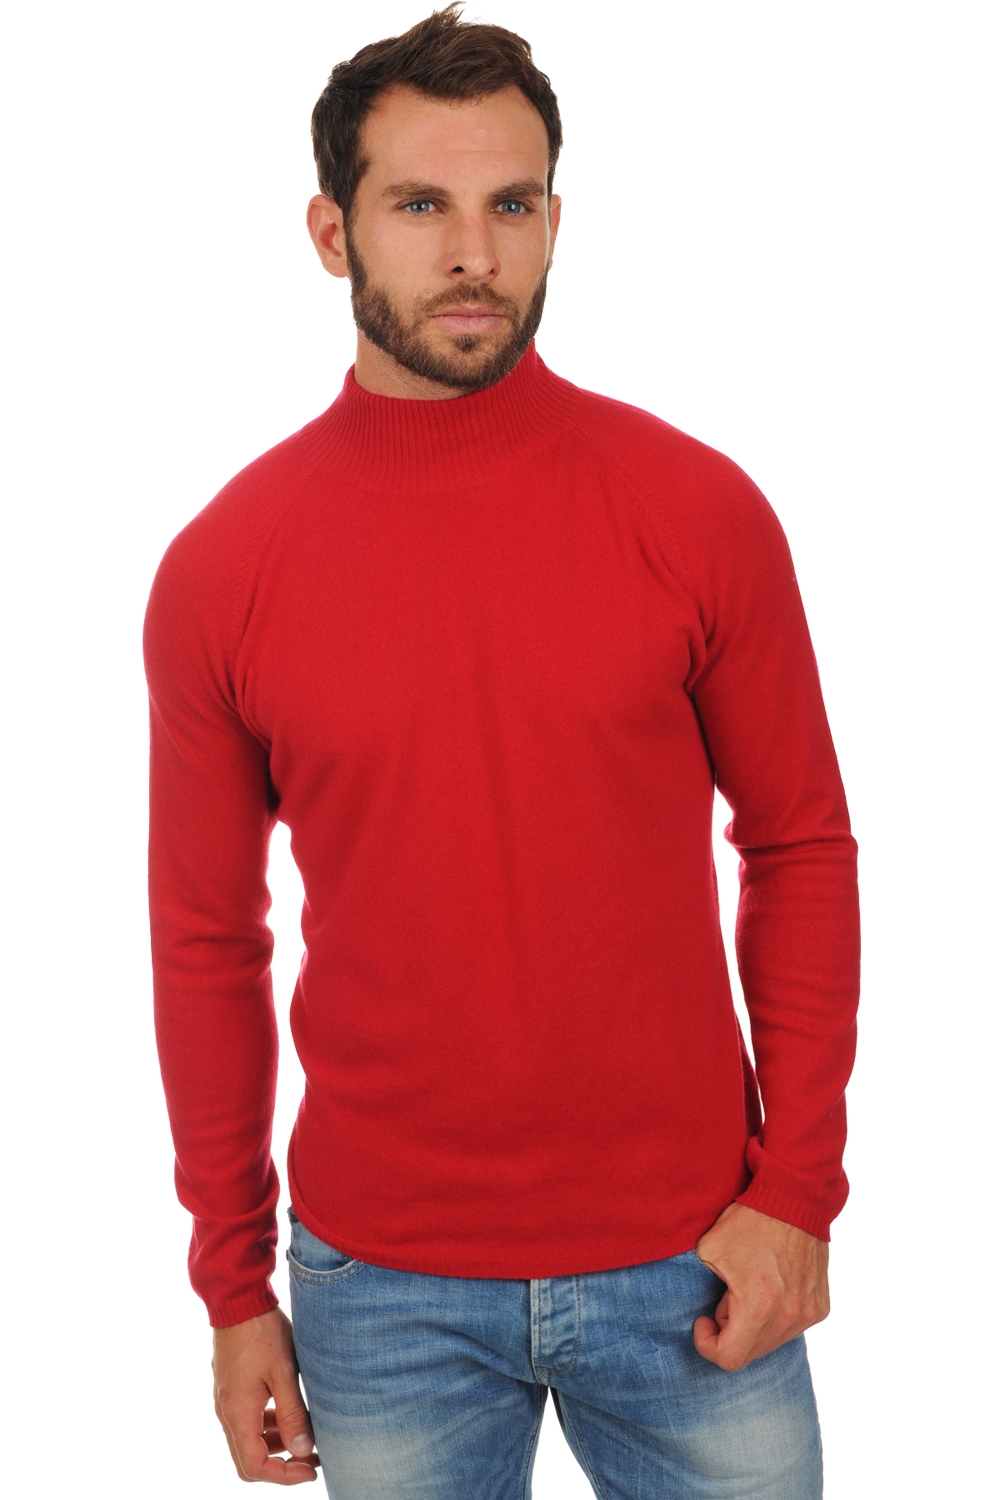 Cashmere men timeless classics frederic blood red s